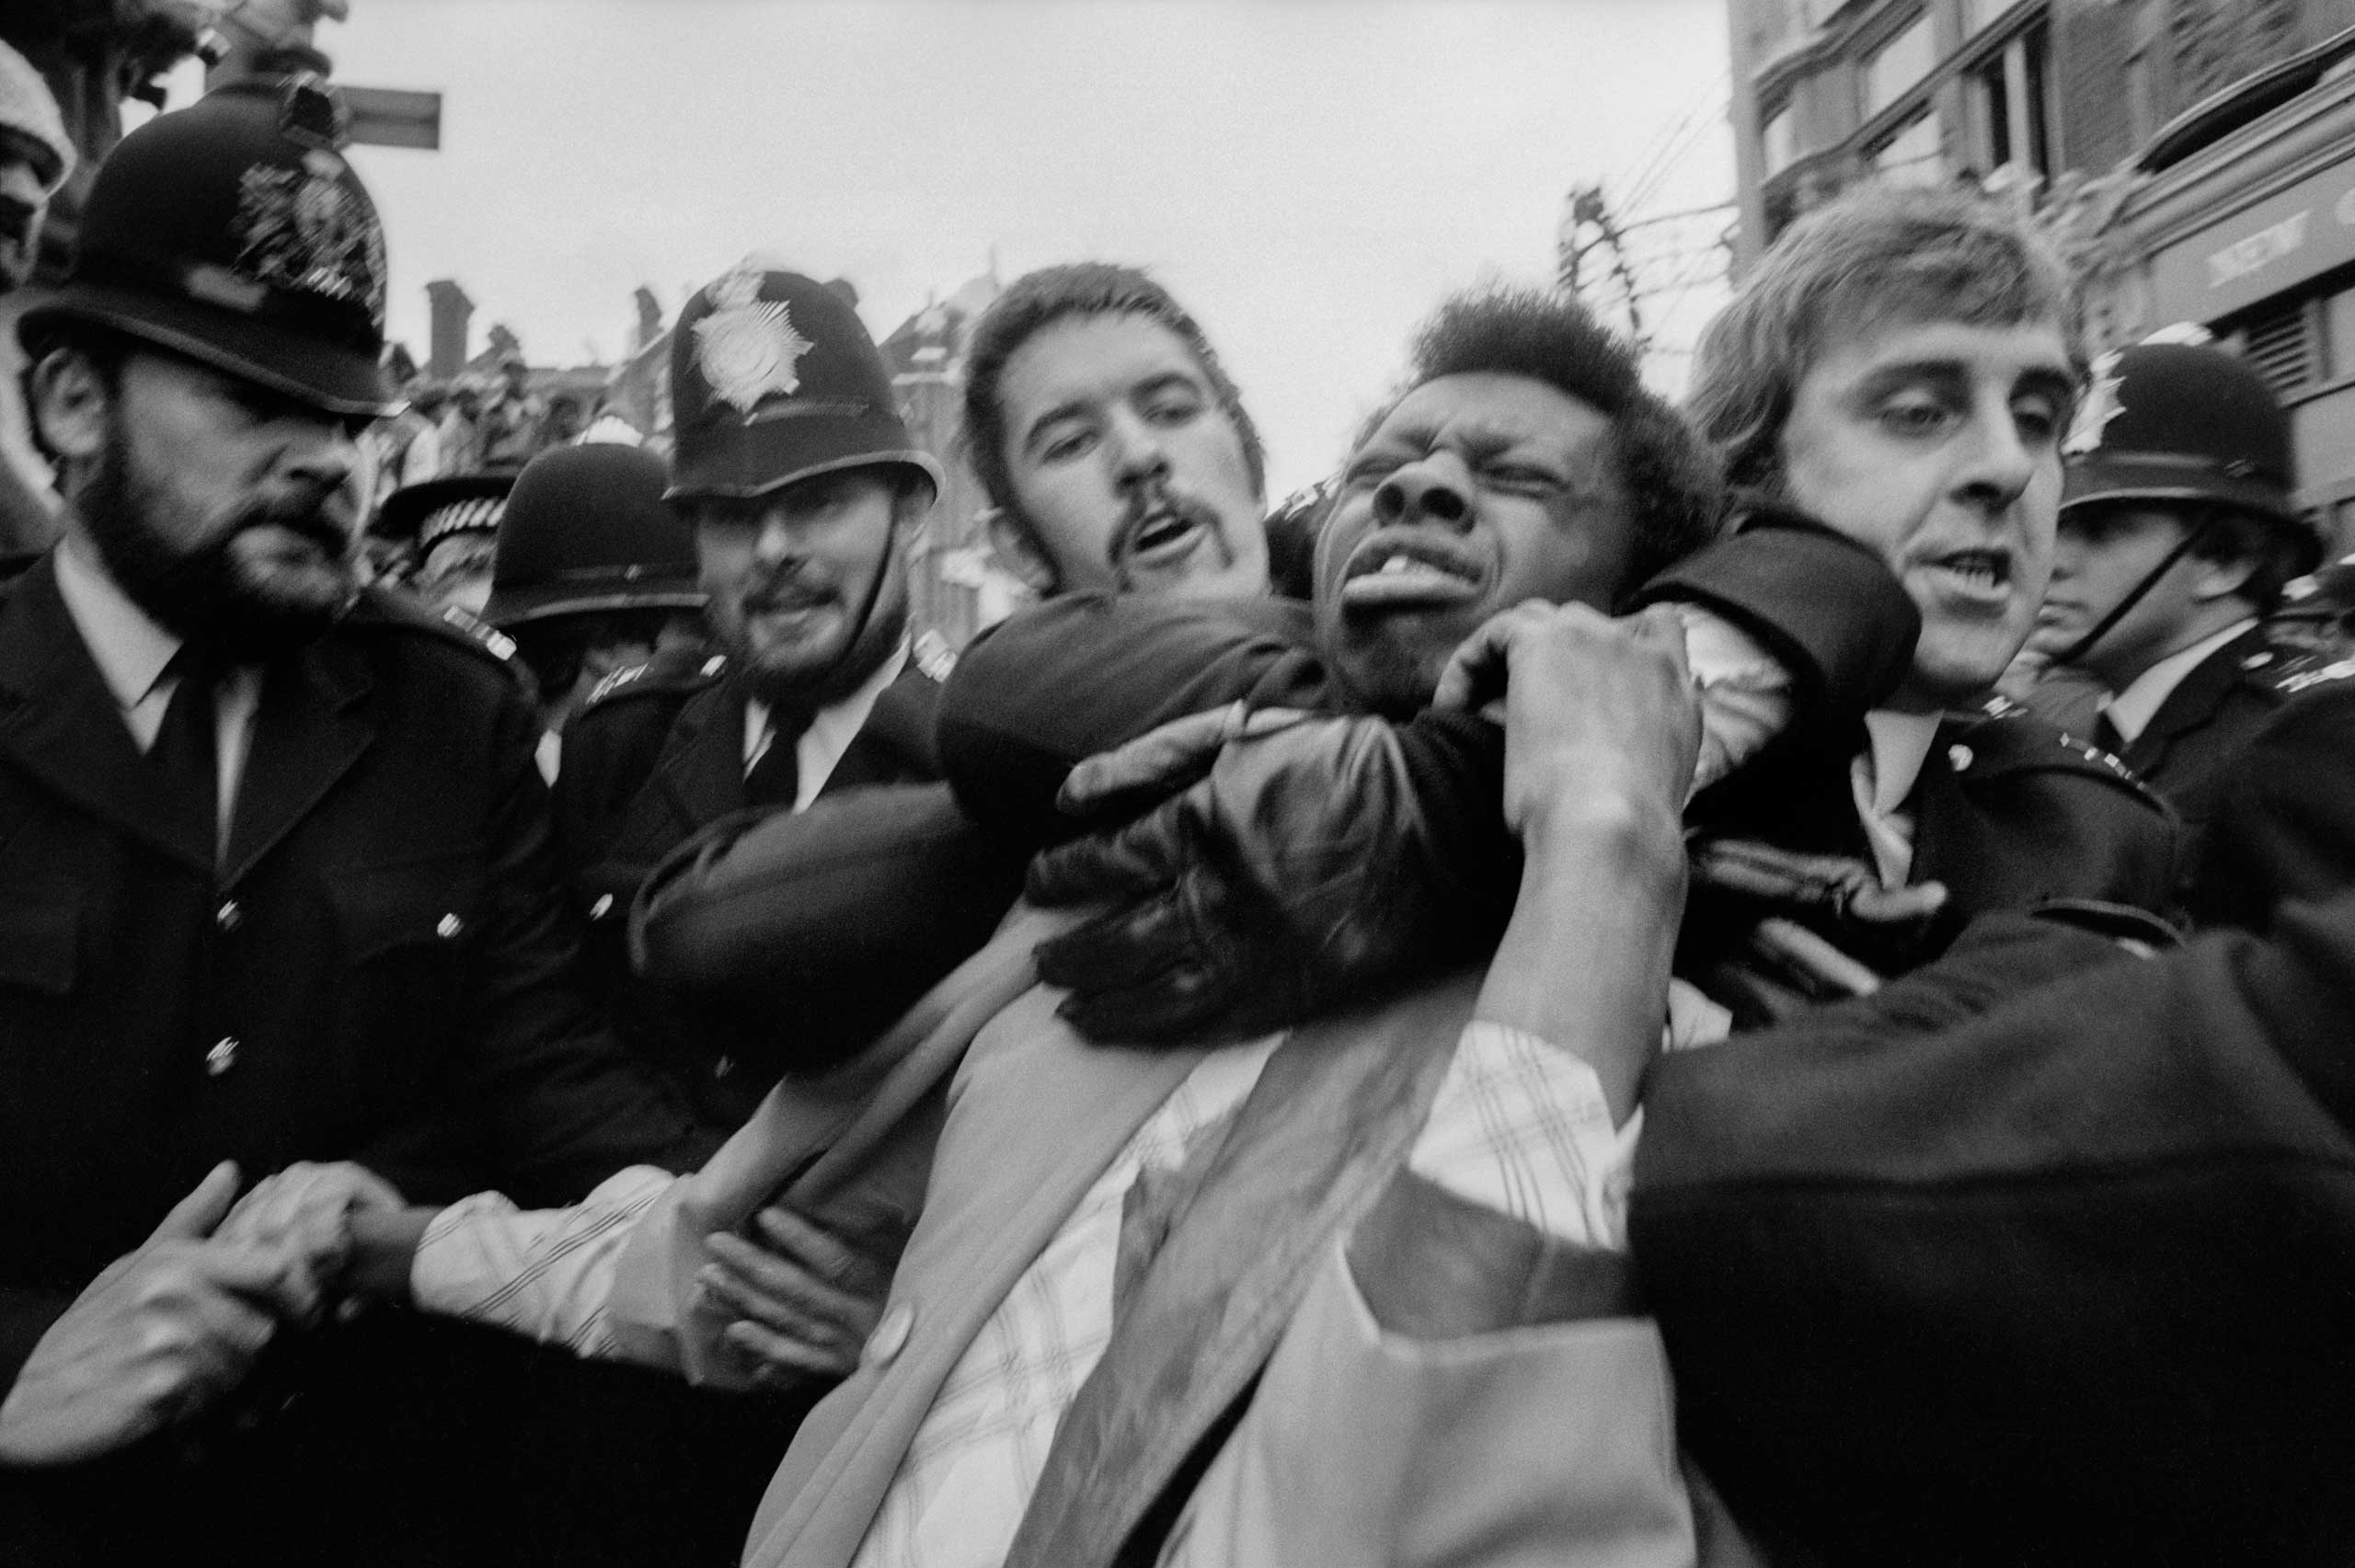 Police making an arrest. during the race riots in Lewisham, London.1977.